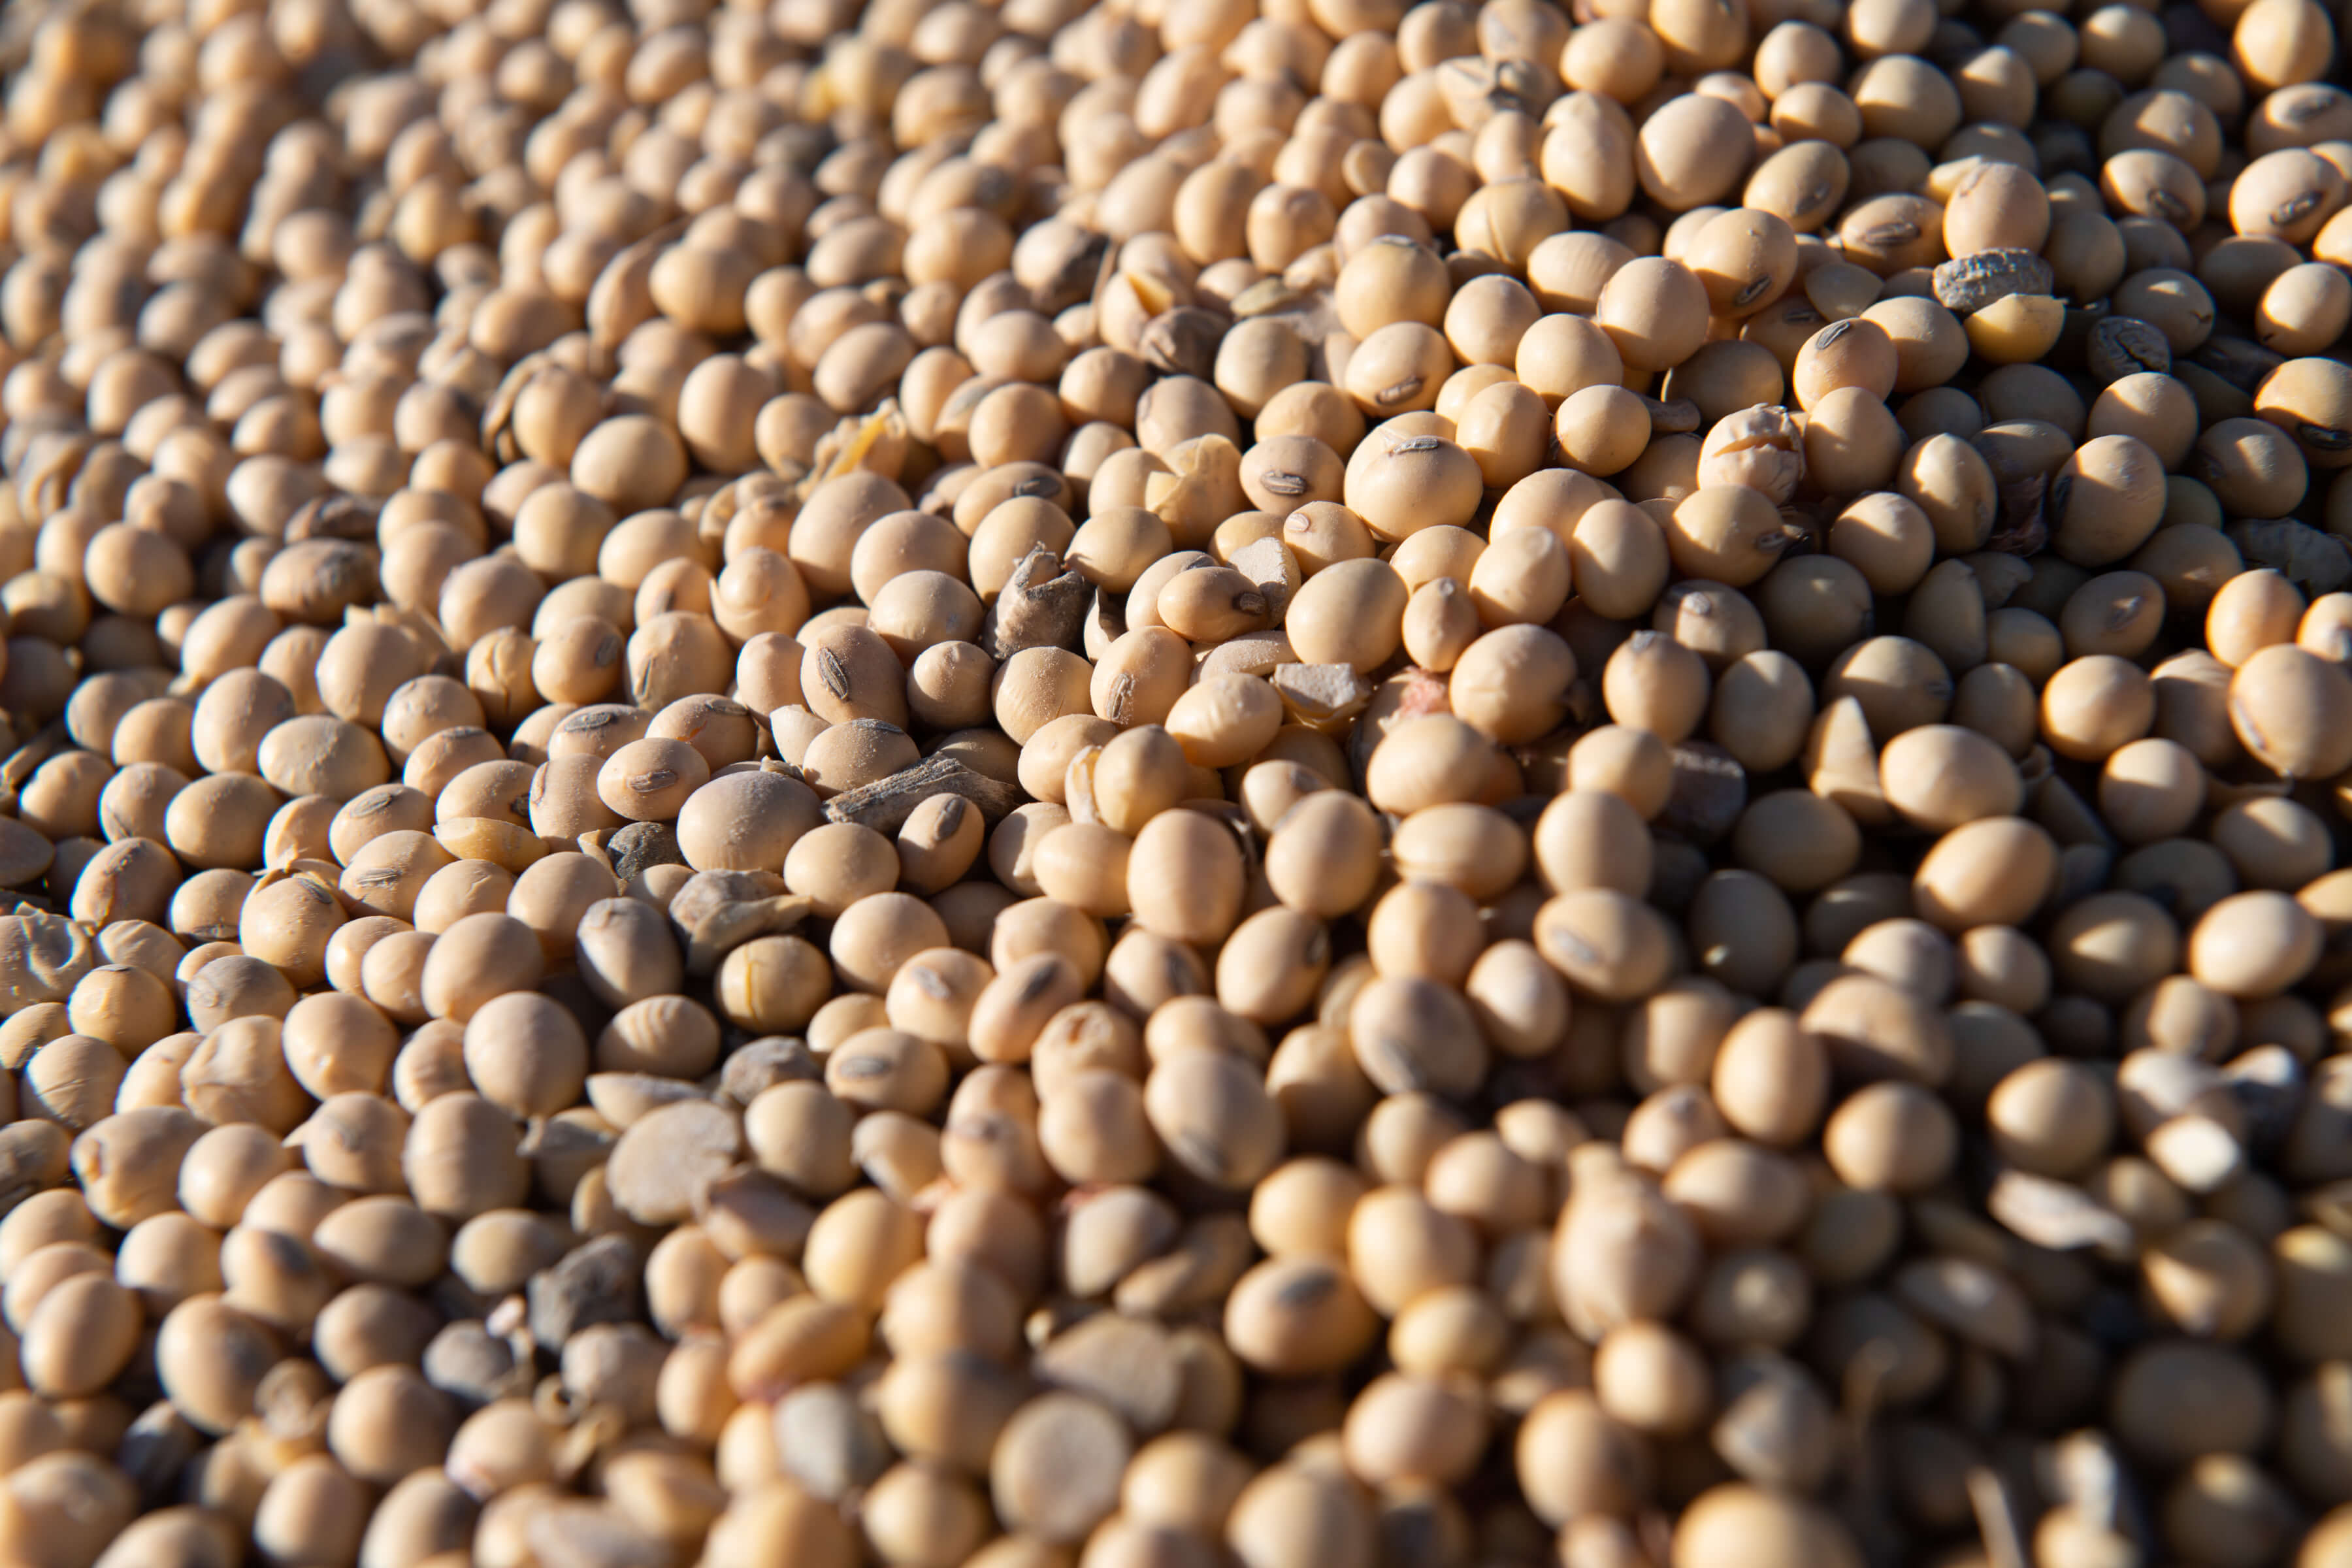 A close-up image of several individual soybeans